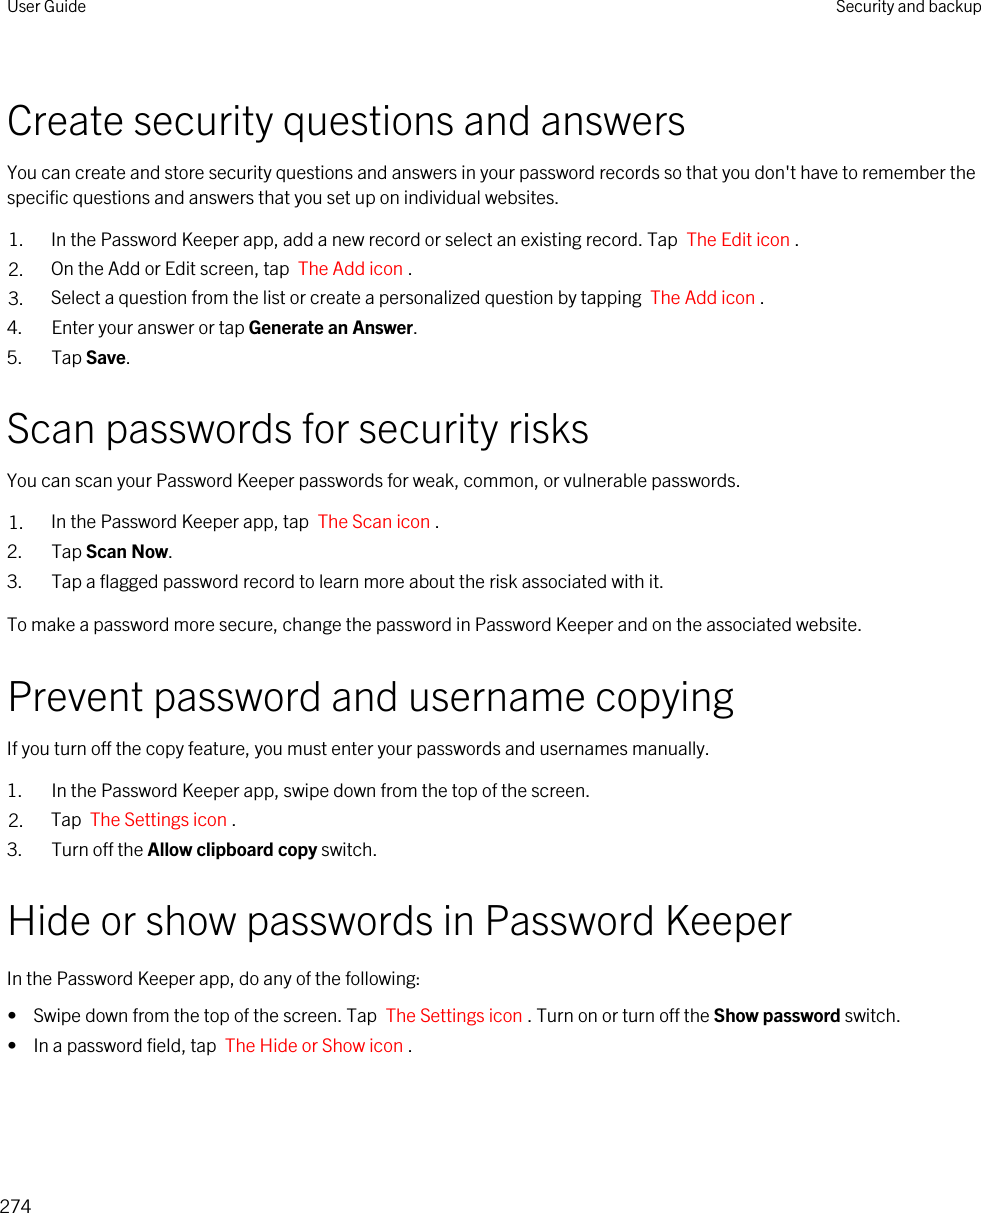 Create security questions and answersYou can create and store security questions and answers in your password records so that you don&apos;t have to remember the specific questions and answers that you set up on individual websites.1. In the Password Keeper app, add a new record or select an existing record. Tap  The Edit icon .2. On the Add or Edit screen, tap  The Add icon .3. Select a question from the list or create a personalized question by tapping  The Add icon .4. Enter your answer or tap Generate an Answer.5. Tap Save.Scan passwords for security risksYou can scan your Password Keeper passwords for weak, common, or vulnerable passwords.1. In the Password Keeper app, tap  The Scan icon .2. Tap Scan Now.3. Tap a flagged password record to learn more about the risk associated with it.To make a password more secure, change the password in Password Keeper and on the associated website.Prevent password and username copyingIf you turn off the copy feature, you must enter your passwords and usernames manually.1. In the Password Keeper app, swipe down from the top of the screen.2. Tap  The Settings icon .3. Turn off the Allow clipboard copy switch.Hide or show passwords in Password KeeperIn the Password Keeper app, do any of the following:•  Swipe down from the top of the screen. Tap  The Settings icon . Turn on or turn off the Show password switch.•  In a password field, tap  The Hide or Show icon .User Guide Security and backup274